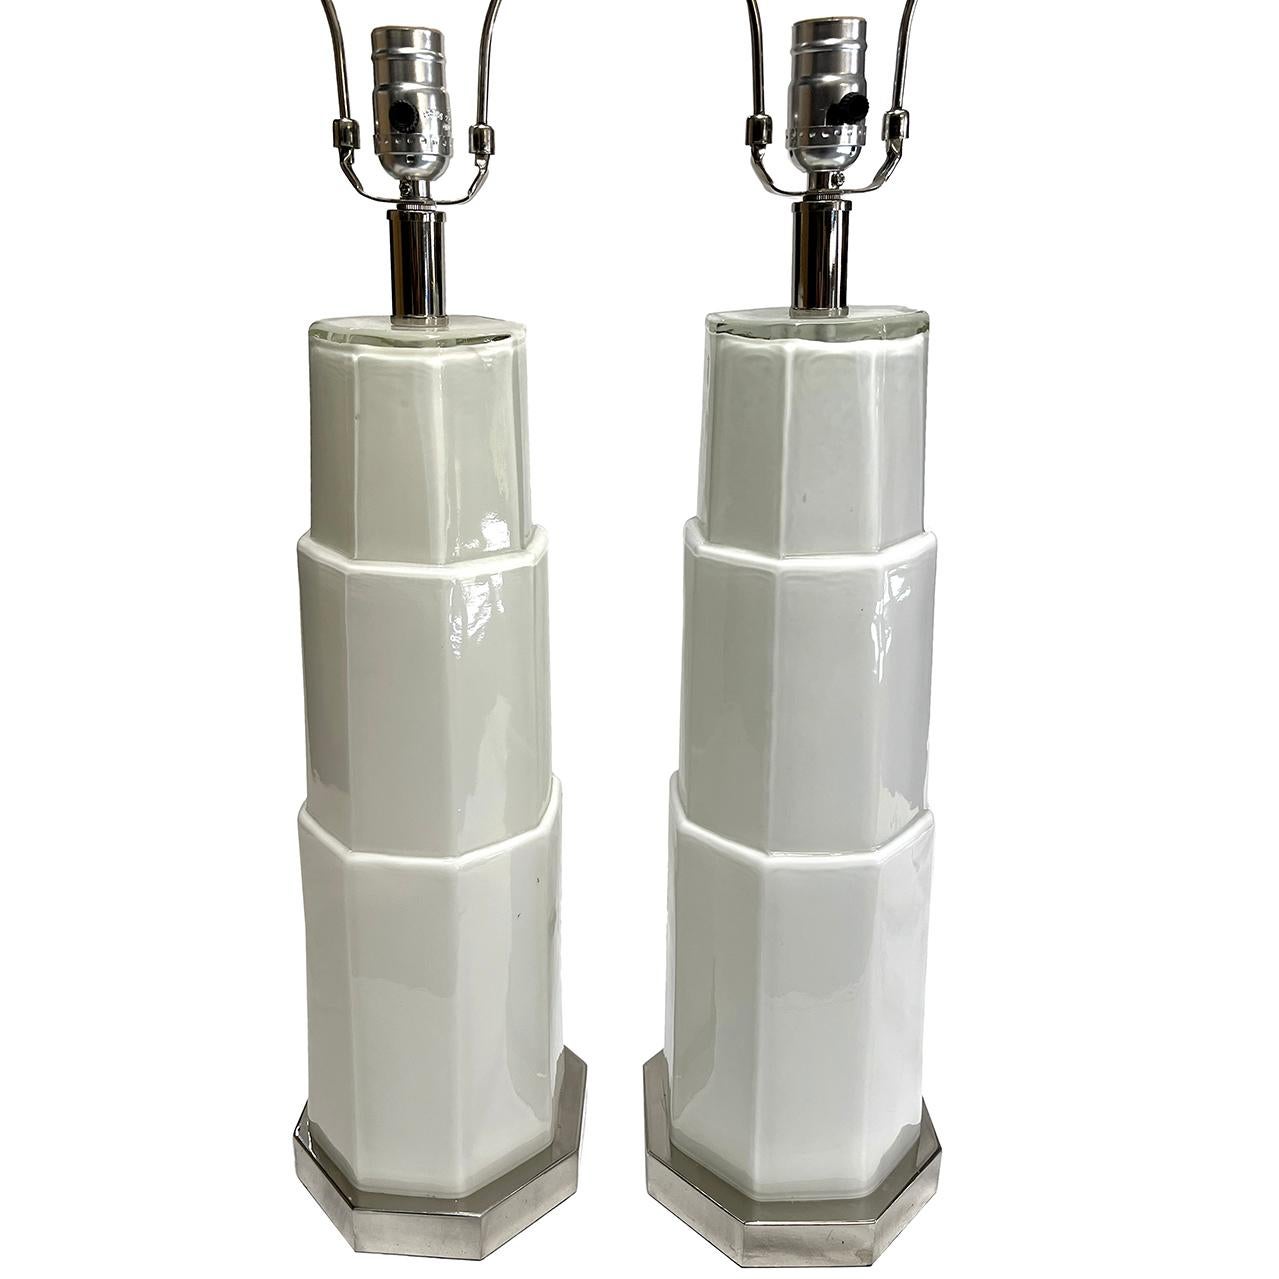 Pair of French circa 1970's cased & molded glass table lamps with nickel plated bases.

Measurements:
Height of body: 20